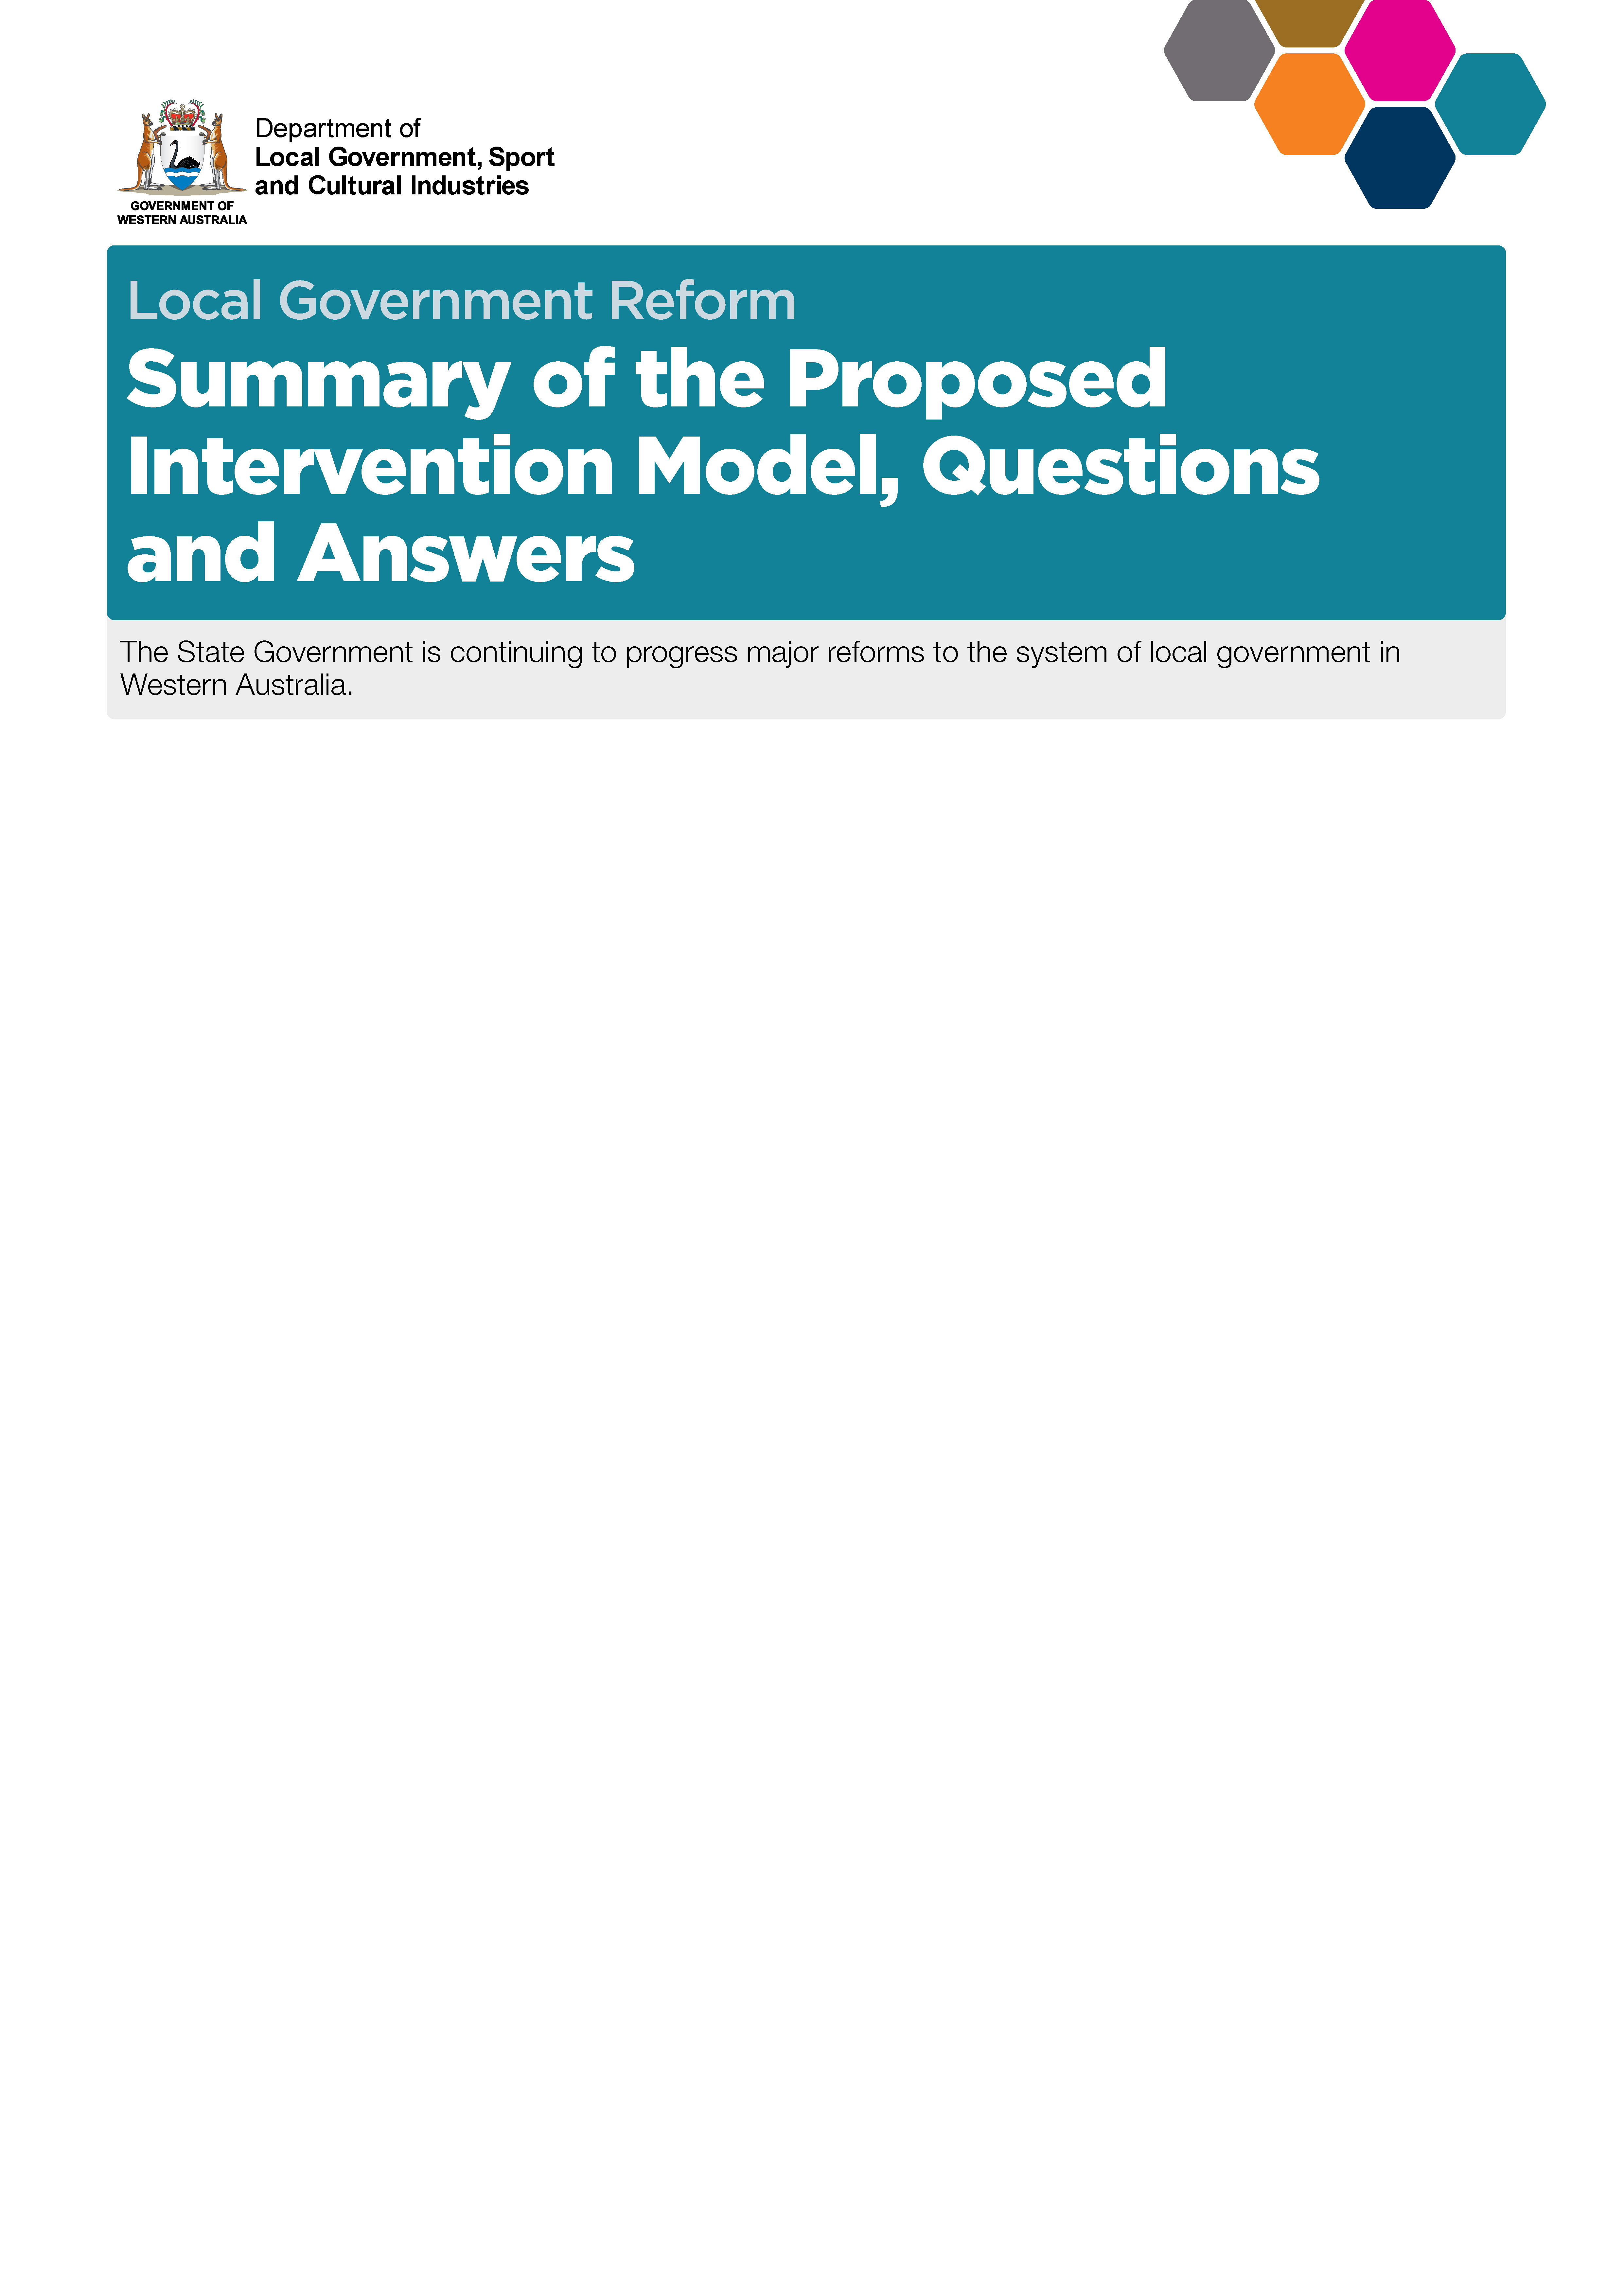 Summary of the Proposed Intervention Model, Questions and Answers